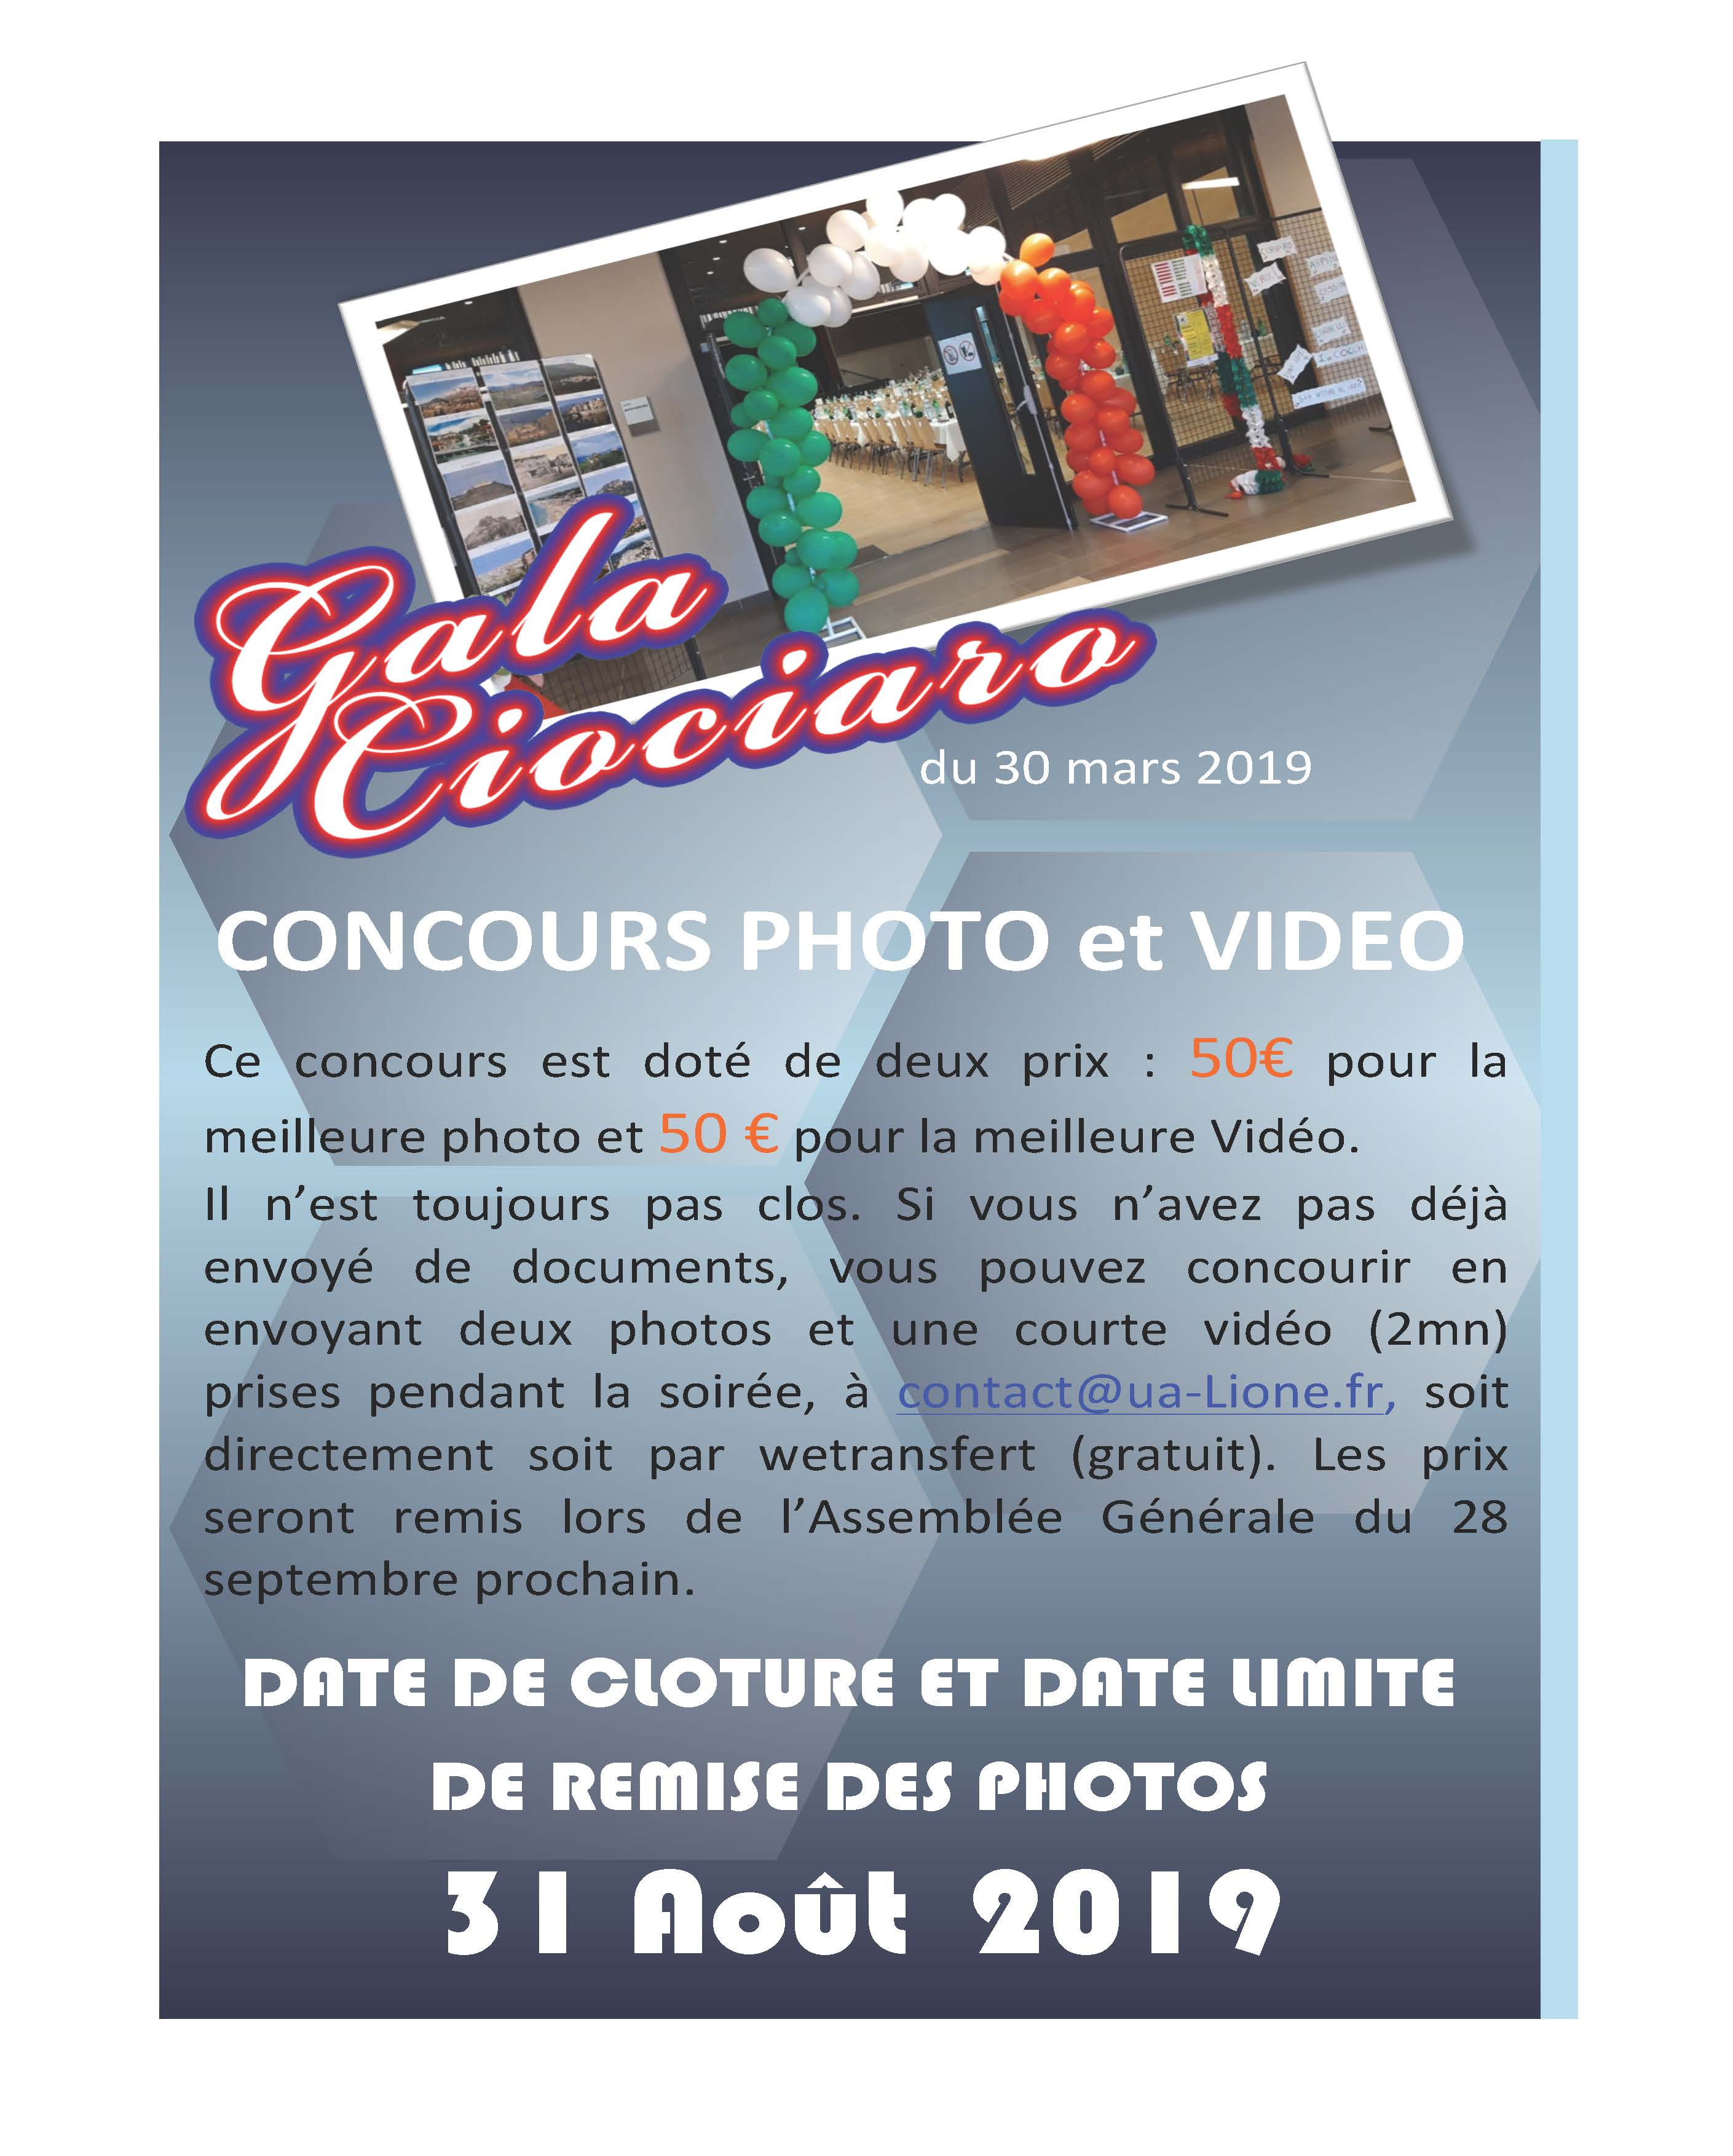 Cloture concours photo gala